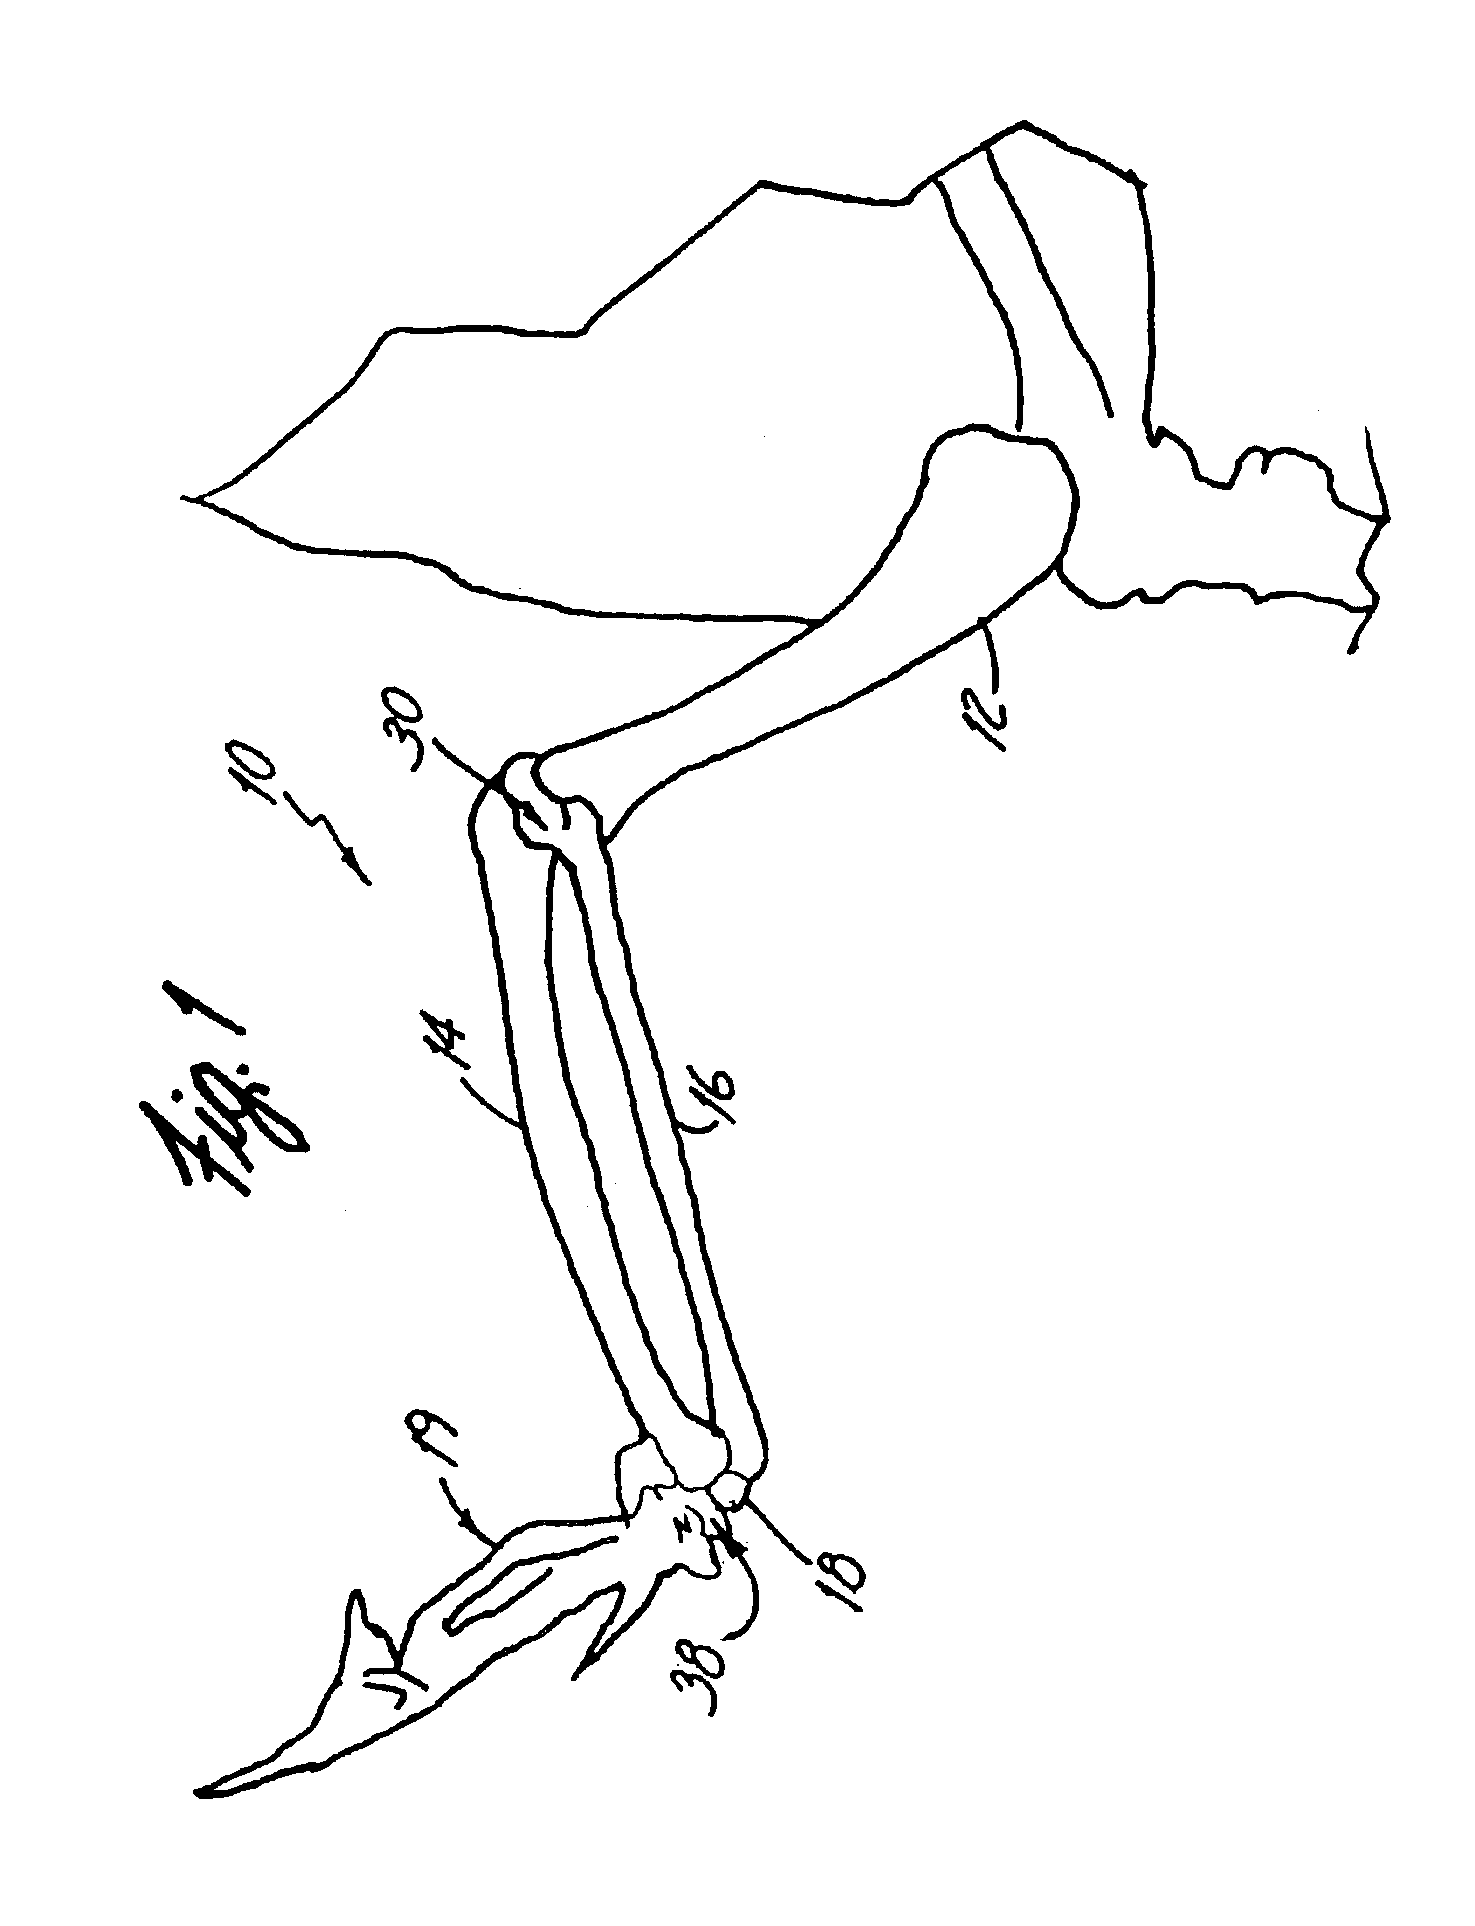 Method for making a fowl wing cut and the resultant product